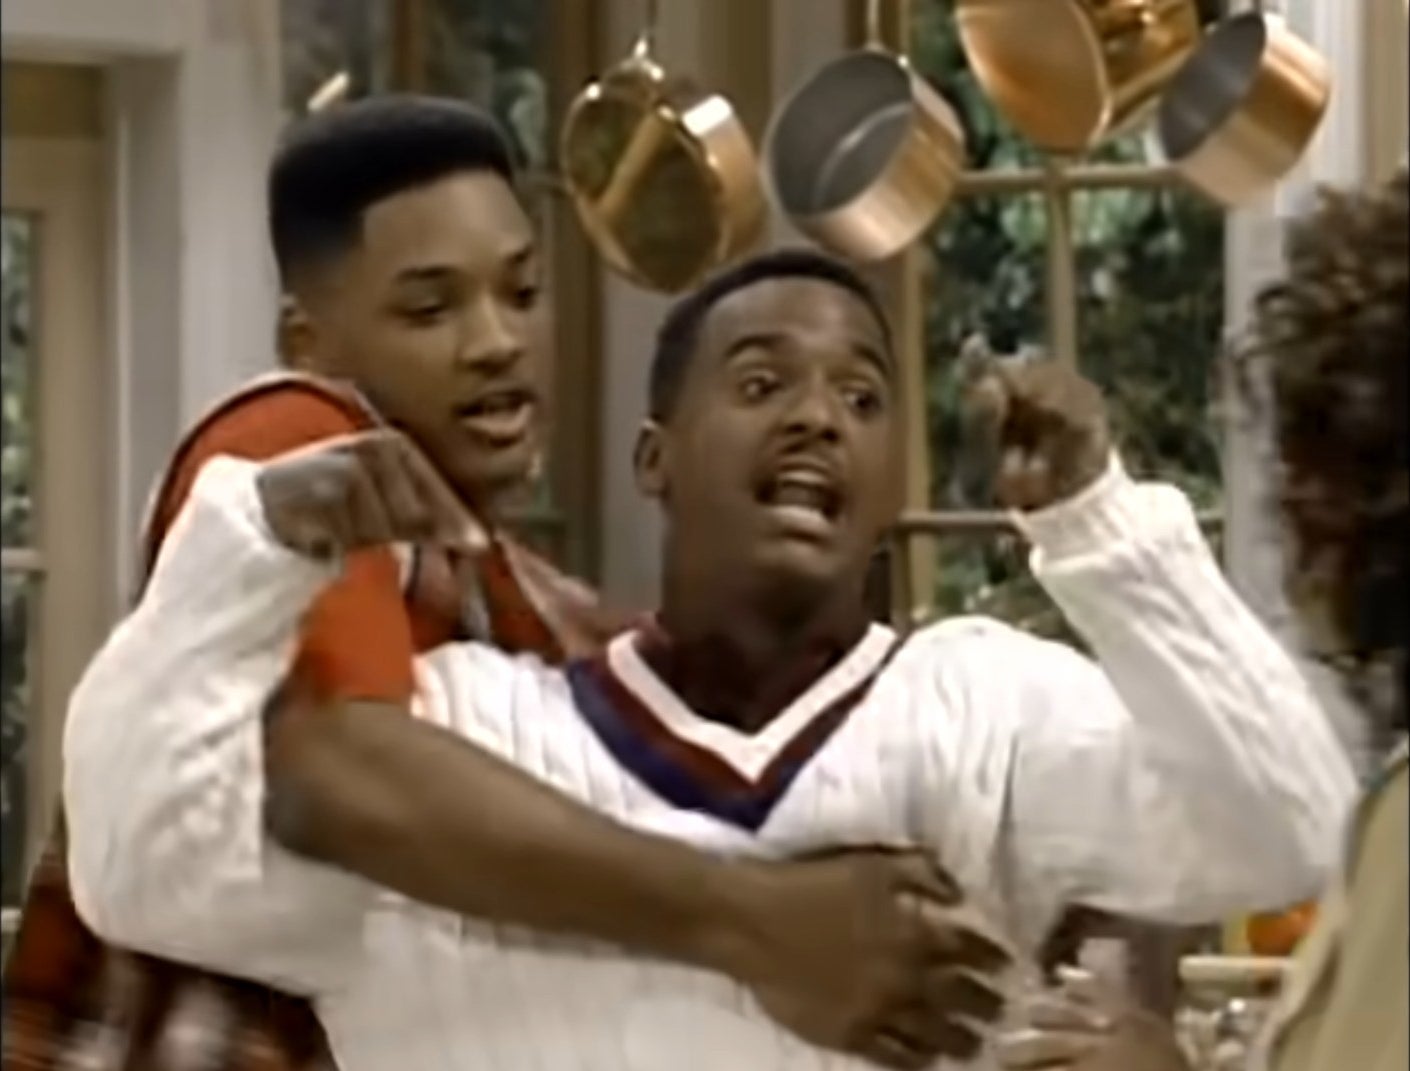 Will and Carlton